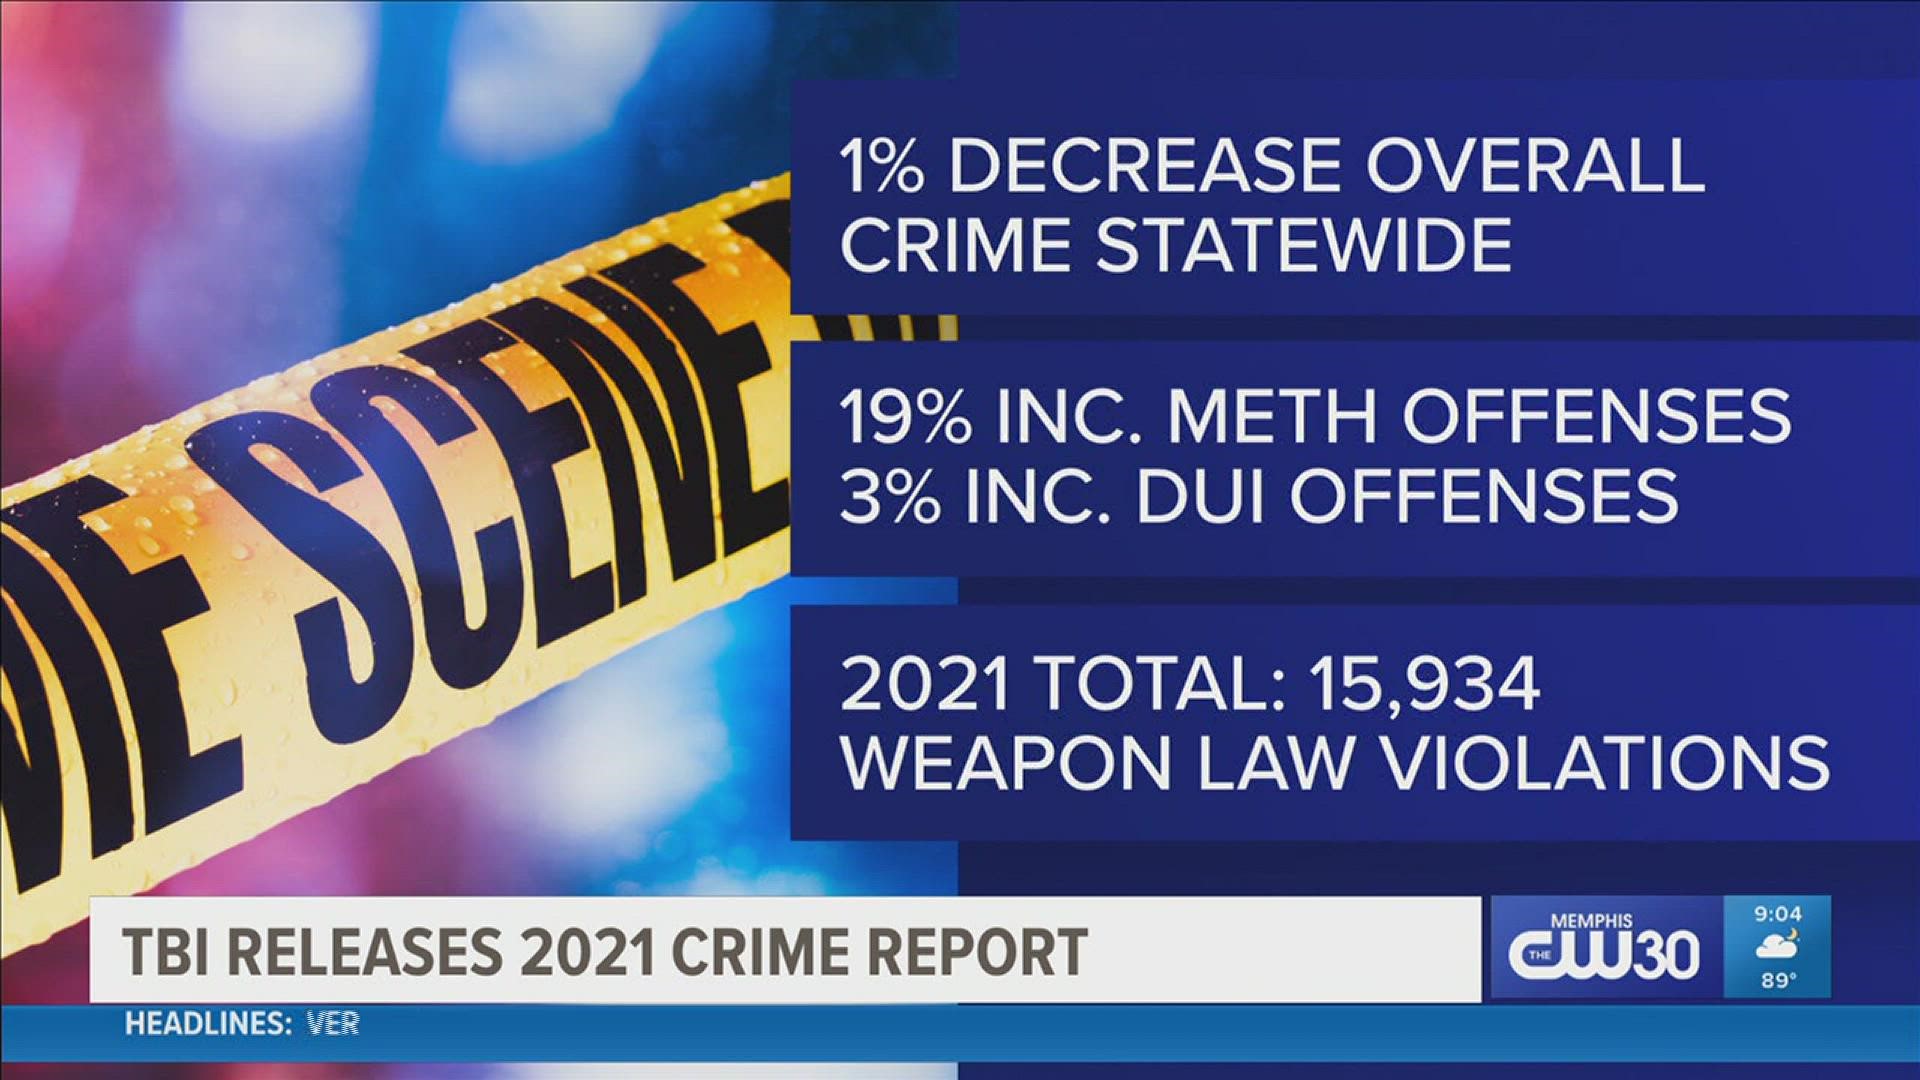 The annual report takes a look at crime statistics submitted by law enforcement across the state.